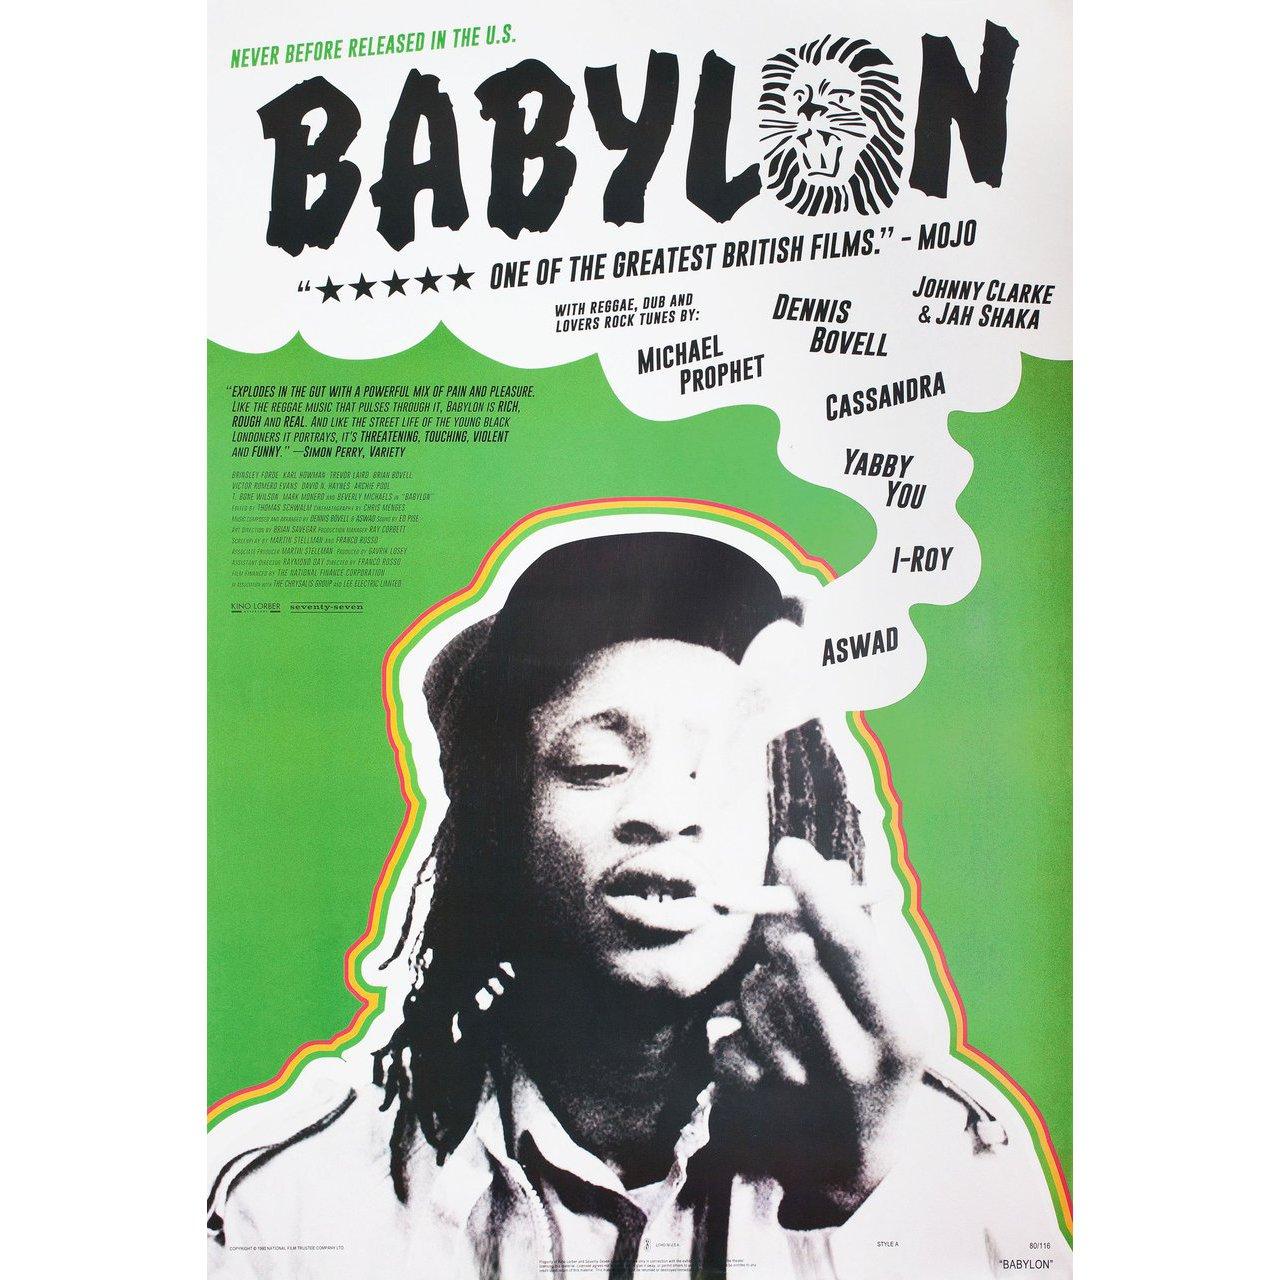 Original 2019 U.S. one sheet poster for the first U.S. theatrical release of the 1980 film Babylon directed by Franco Rosso with David N. Haynes / Trevor Laird / Victor Romero Evans / Brian Bovell. Very good-fine condition, rolled. Please note: the